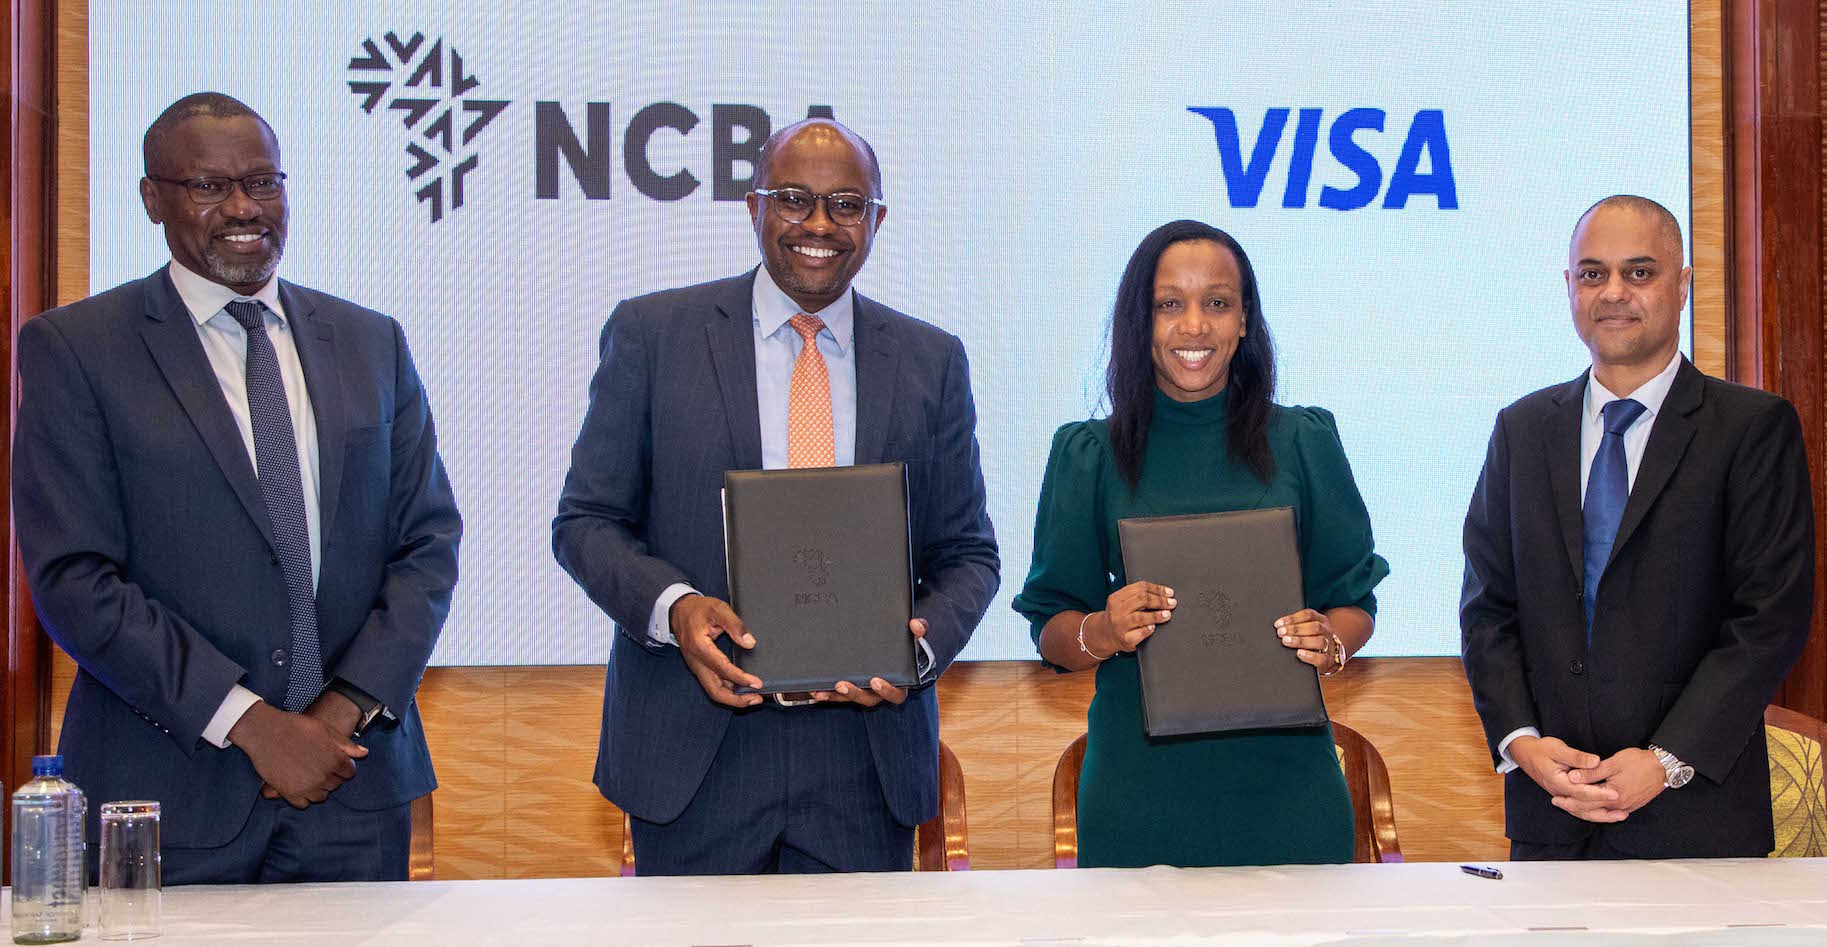 From Left: Charles Omondi-Group Director Corporate Banking NCBA , Tirus Mwithiga Group Director Retail Banking NCBA, Eva Ngigi Sarwari Ag General Manager Visa East Africa and Essop Imraan- Senior Director Head VISA Commercial Solution - Sub Saharan Africa (SSA) during the launch of Visa Spend Clarity for Enterprise for commercial card clients of NCBA .